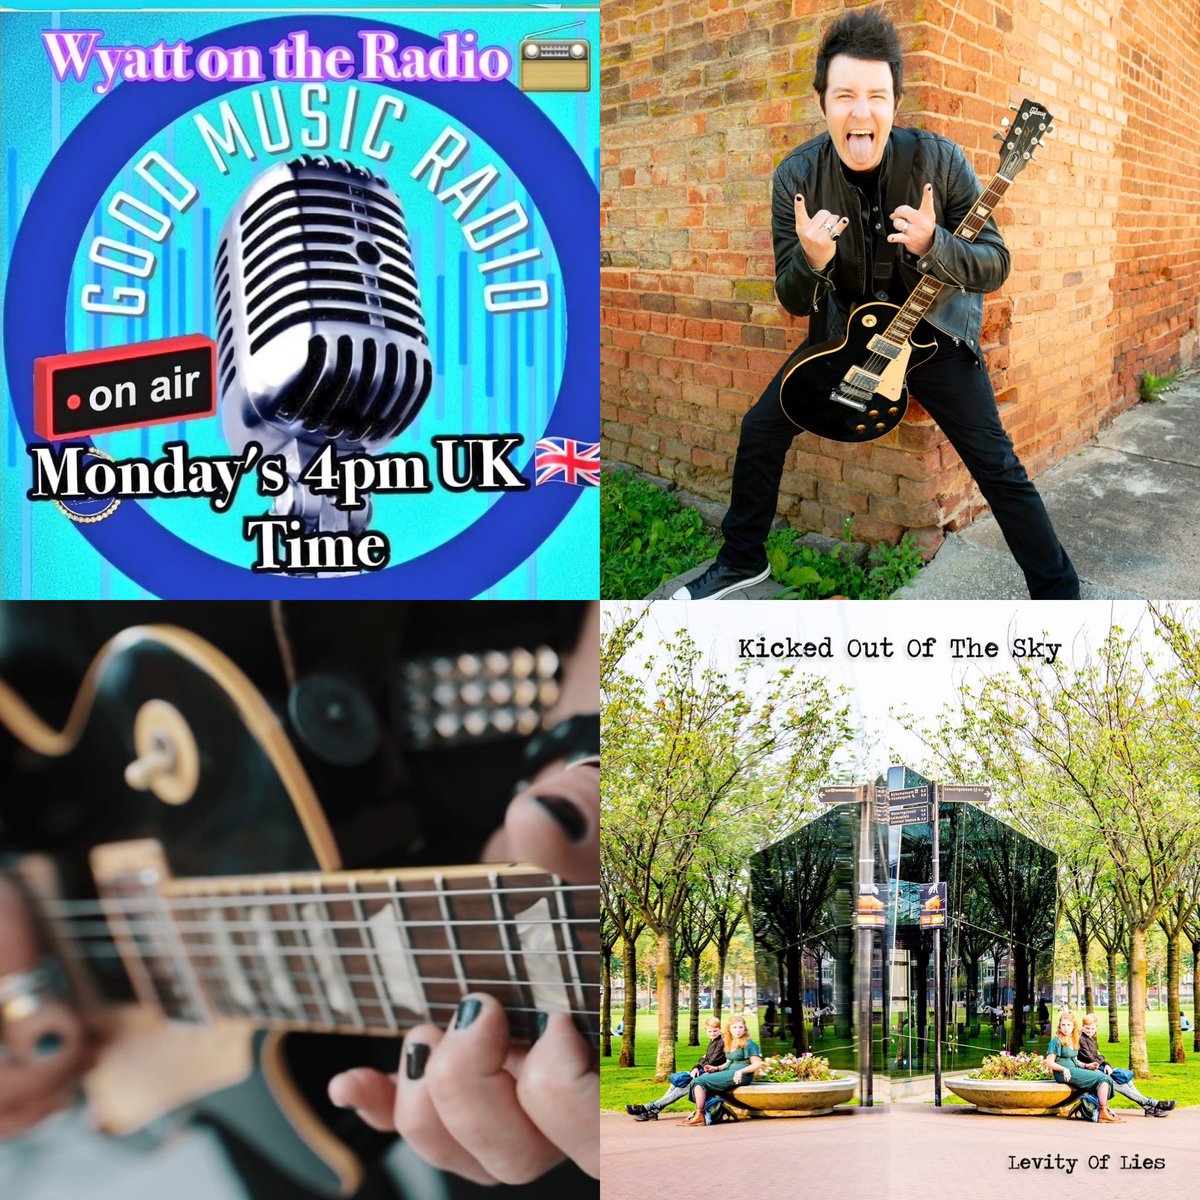 @wyattpauley @Goodmusicradio5 @KeithShawMusic @RevCavs @claire_coups @Delerium65 @HealthyJunkies @luxthereal1 @funkmonkeymetal Tune in Mon. 05.13.24 4pm UK for the #WyattOnTheRadioShow, on @Goodmusicradio5 Thank you @wyattpauley and GOOD MUSIC RADIO for your support!! Xx Radio link: goodmusicradio.wixsite.com/gmrts EP link: open.spotify.com/album/1sbV07Fo… Web link: kickedoutofthesky.com 📸: @letgomedia